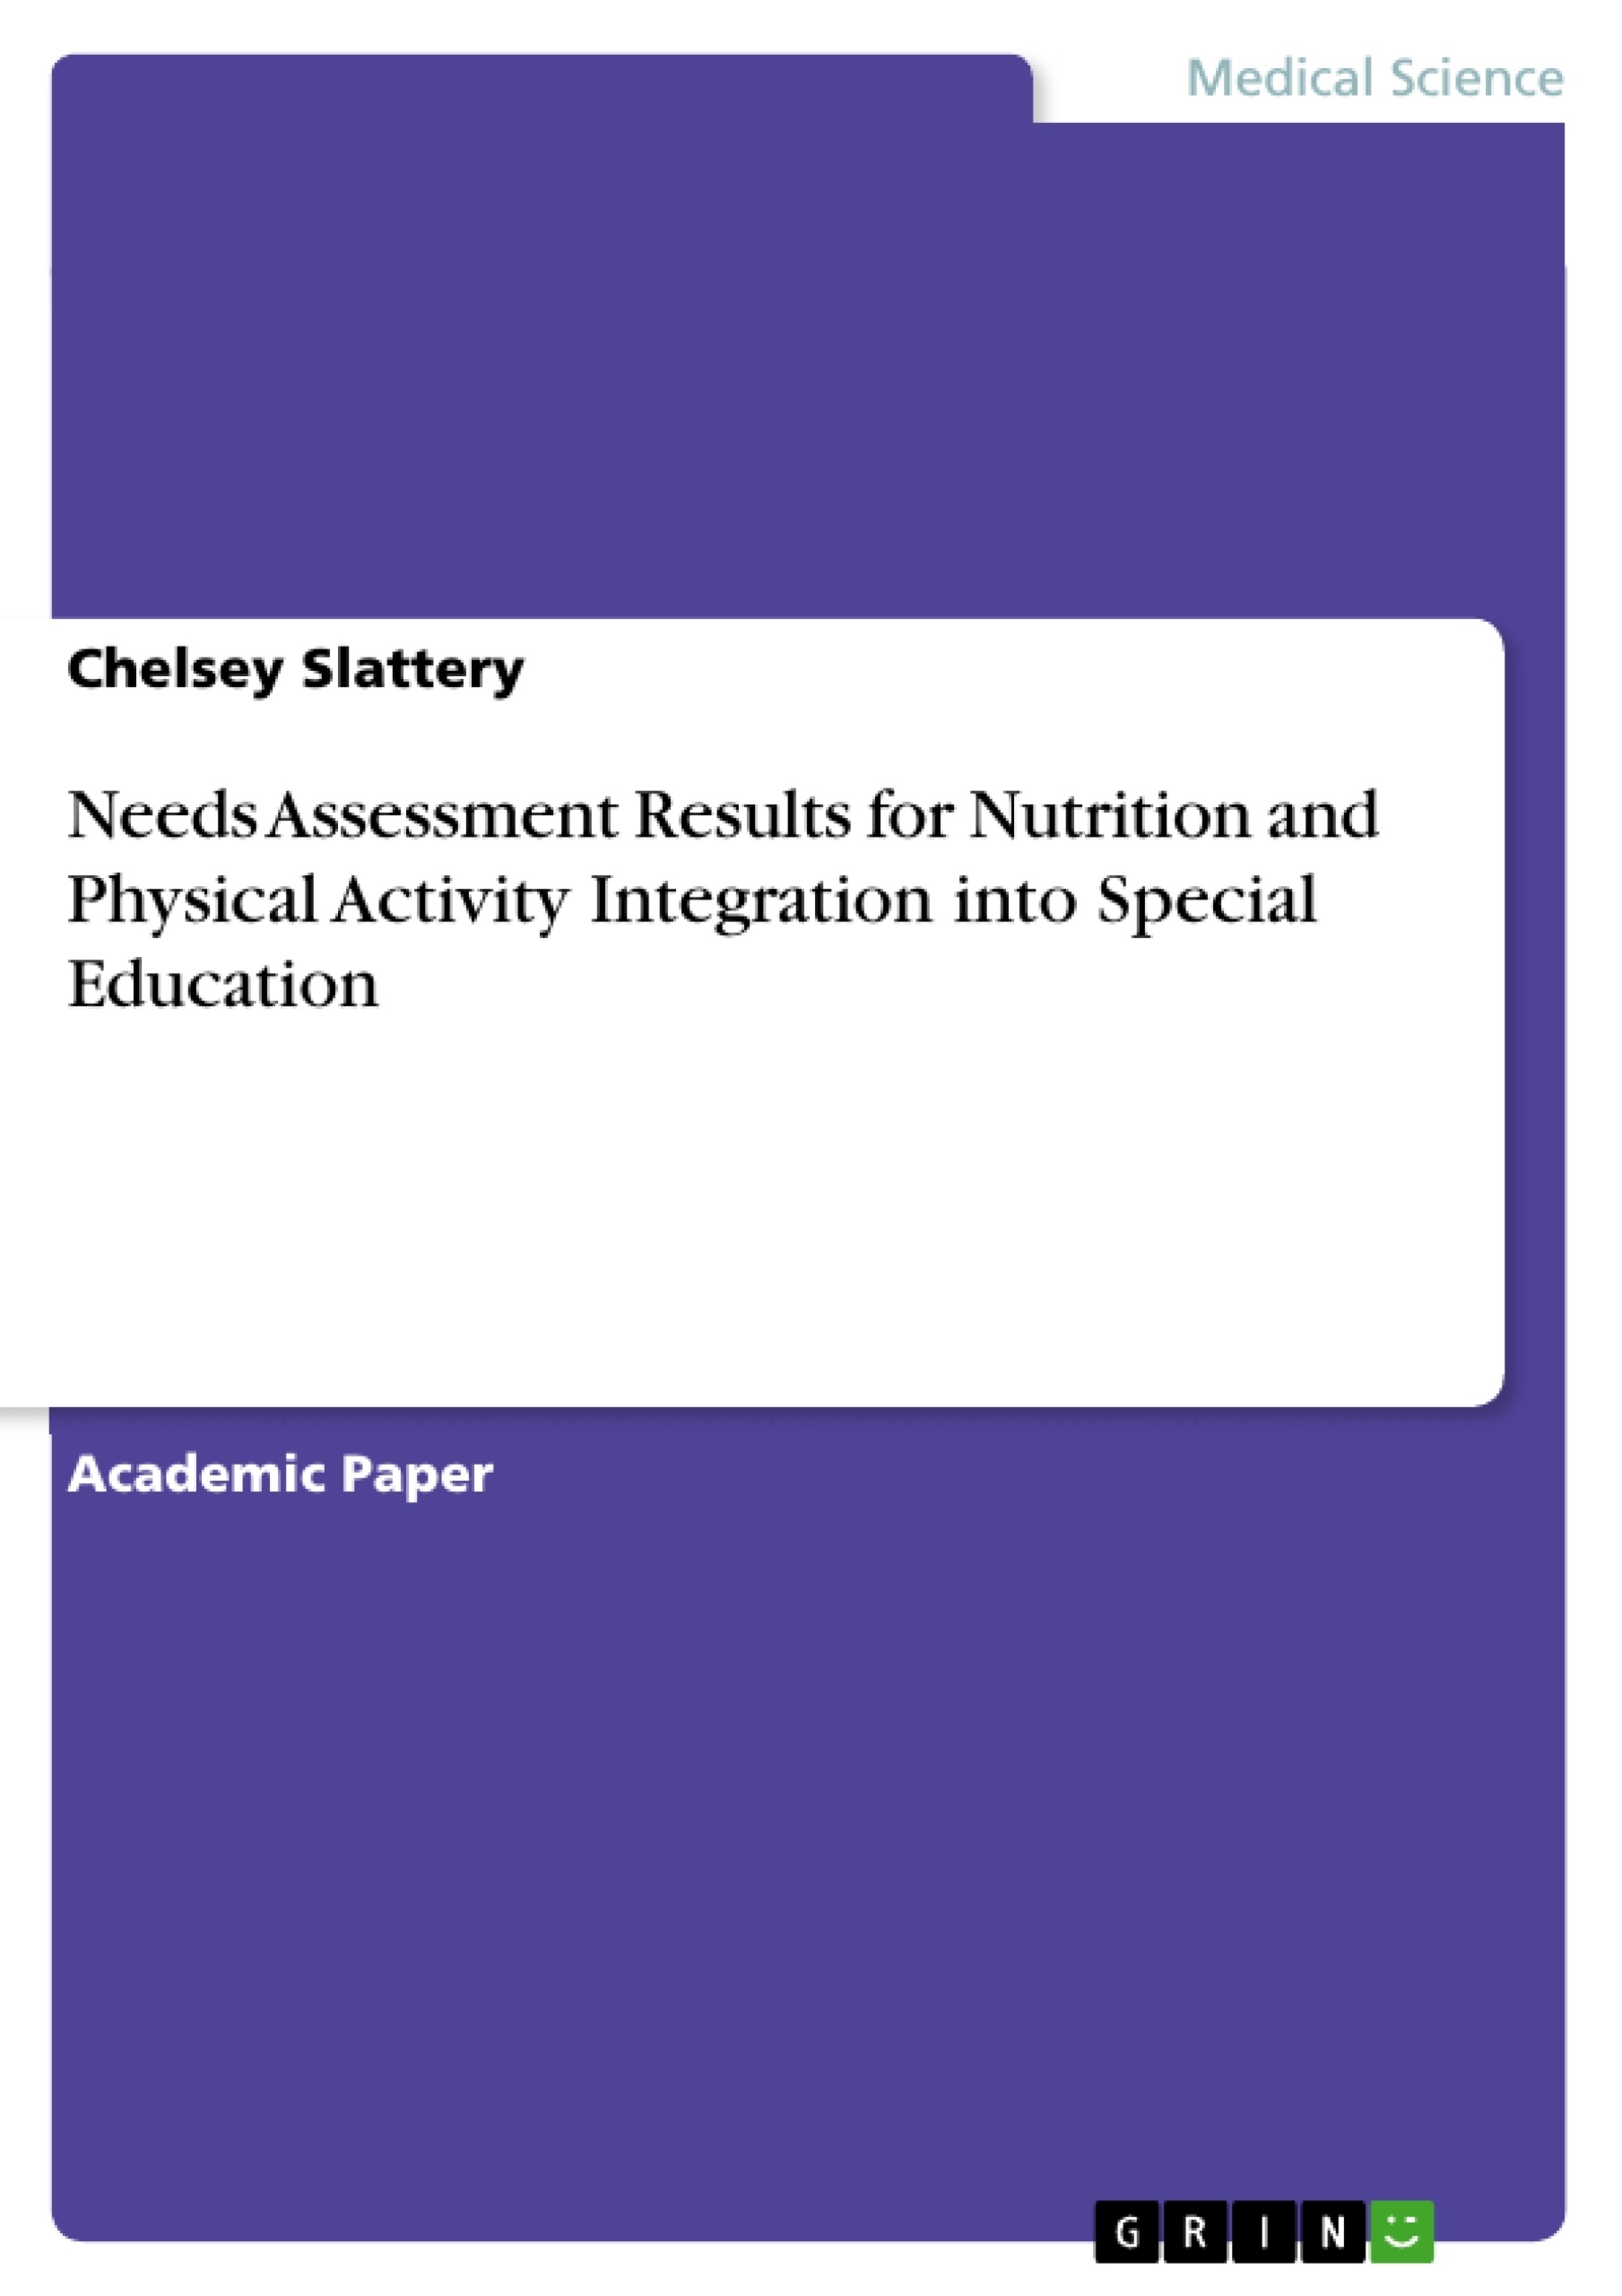 Titel: Needs Assessment Results for Nutrition and Physical Activity Integration into Special Education